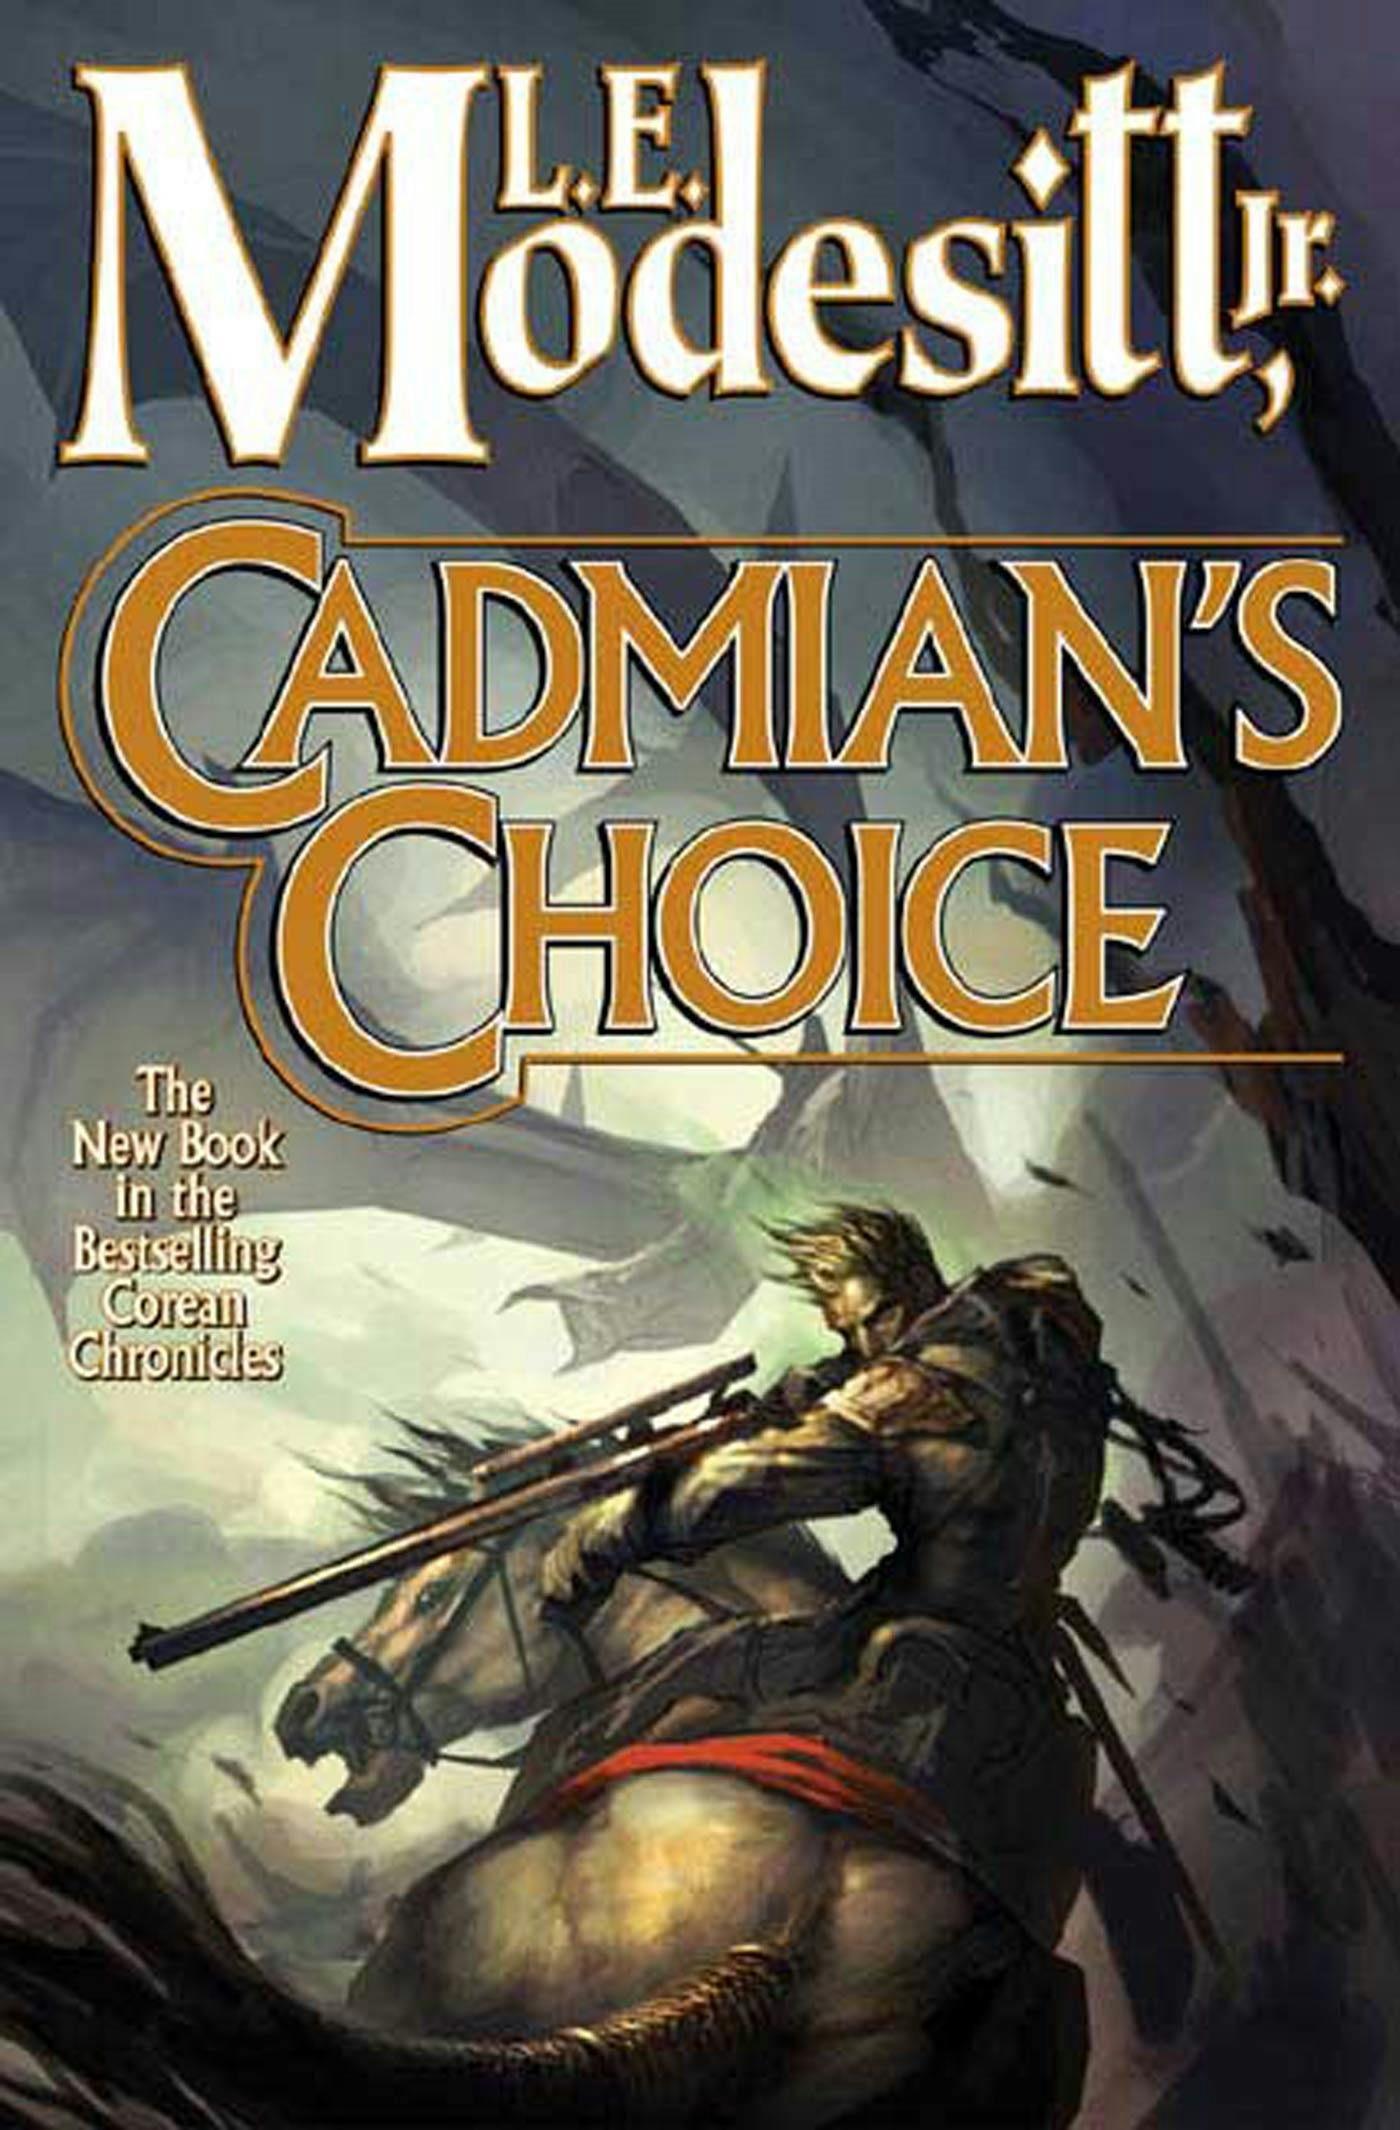 Cover for the book titled as: Cadmian's Choice